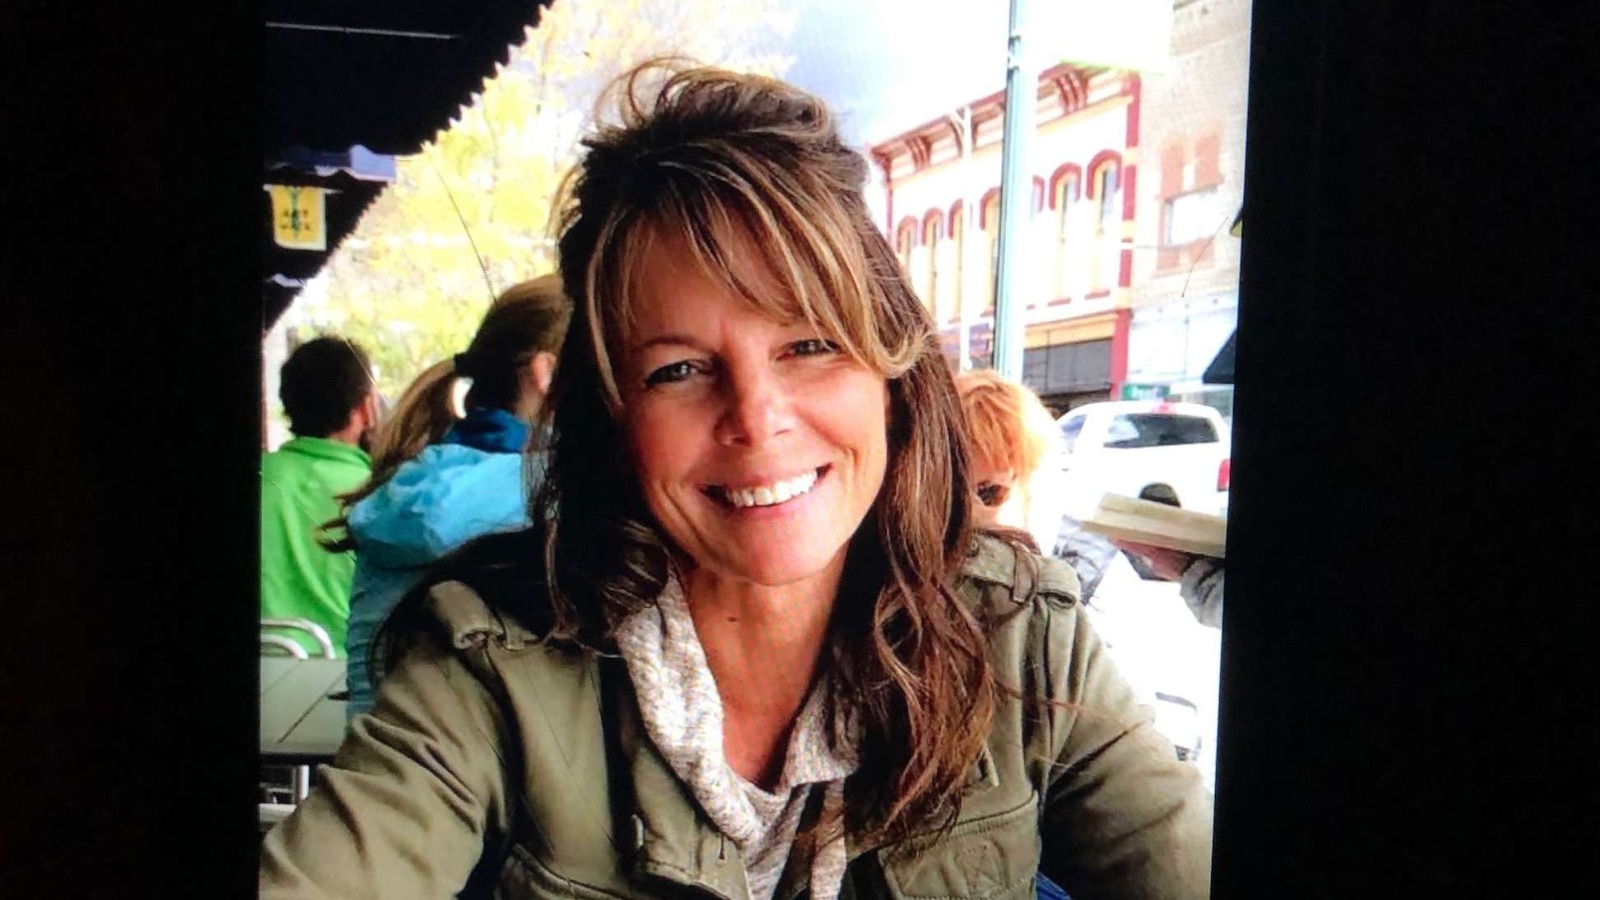 Suzanne Morphew, mother who went missing on bike ride, died by homicide: Autopsy